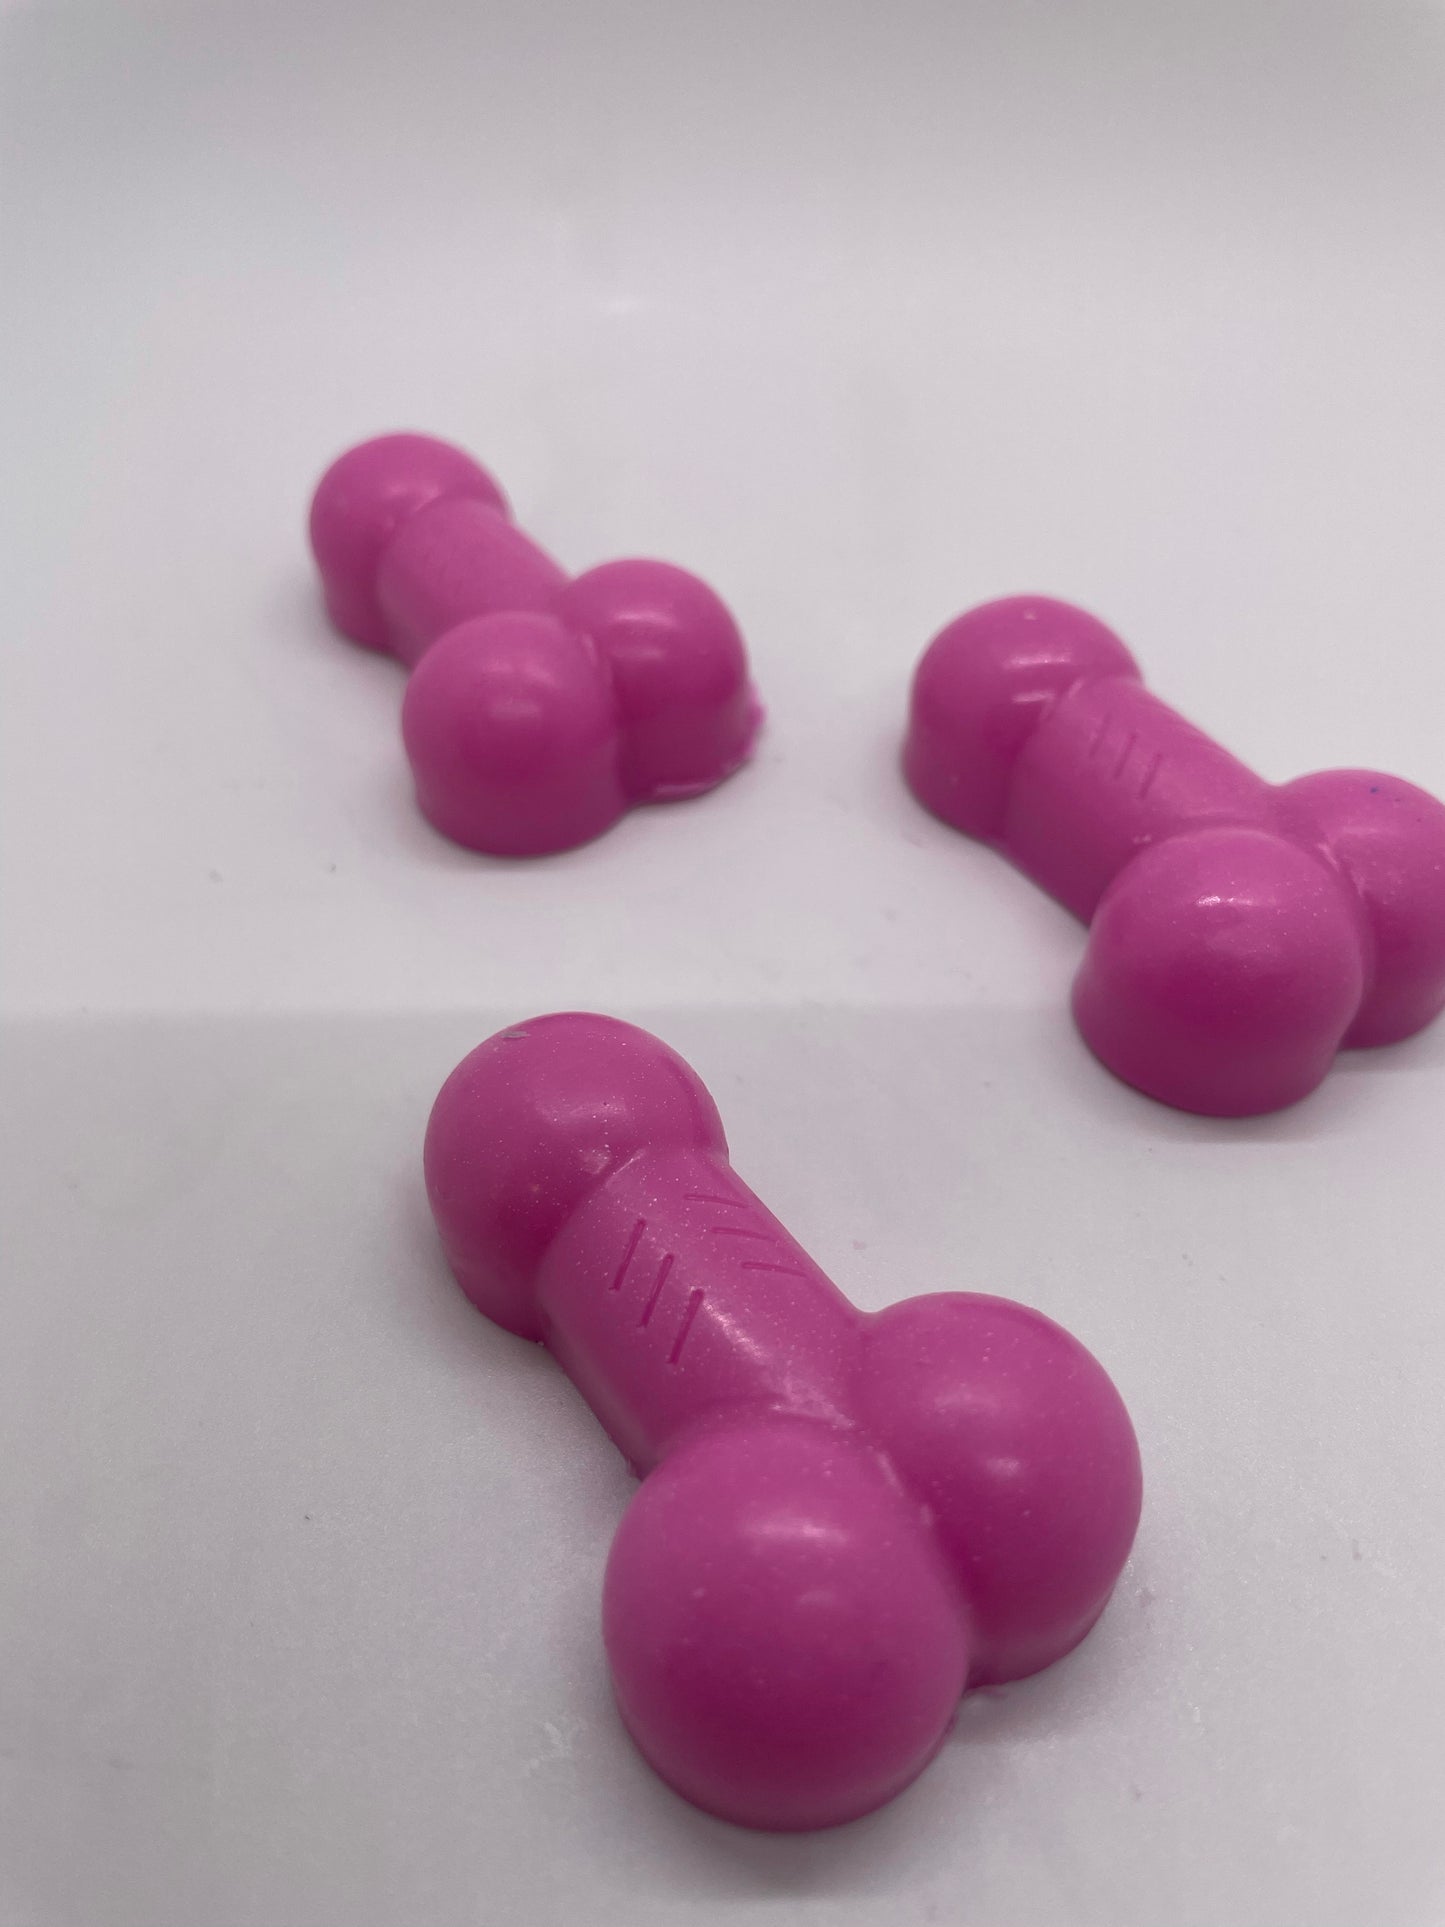 XRATED Penis Soap Bar VARIES IN COLORS